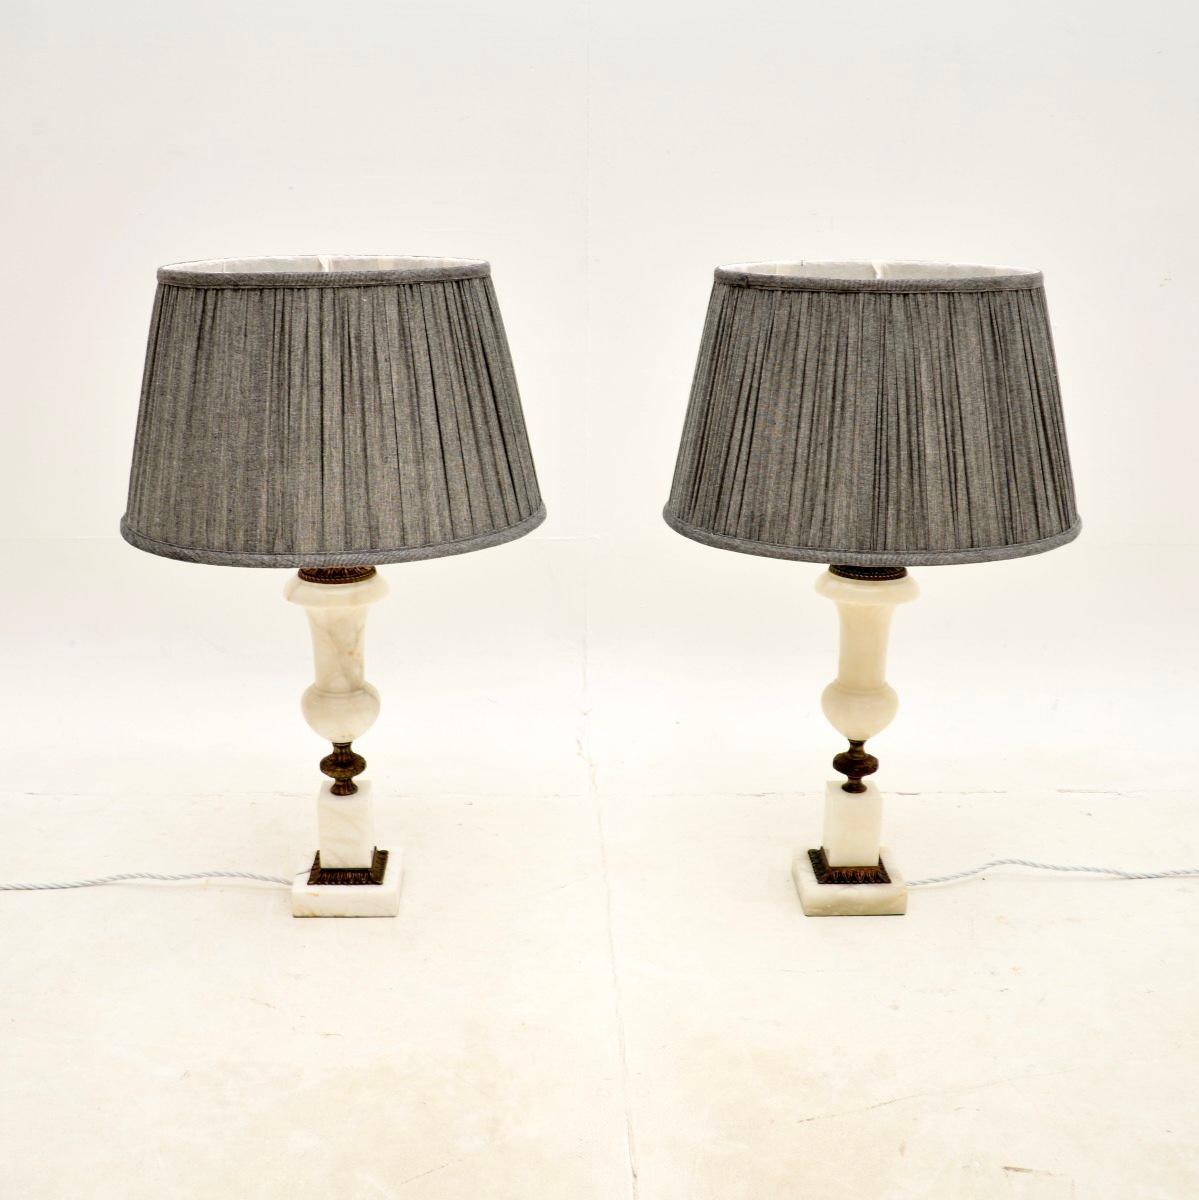 A beautiful pair of antique alabaster table lamps. They were most likely made in France, they date from around the 1930’s.

The quality is excellent, the alabaster is a beautiful white colour with tones of grey running through. They are held